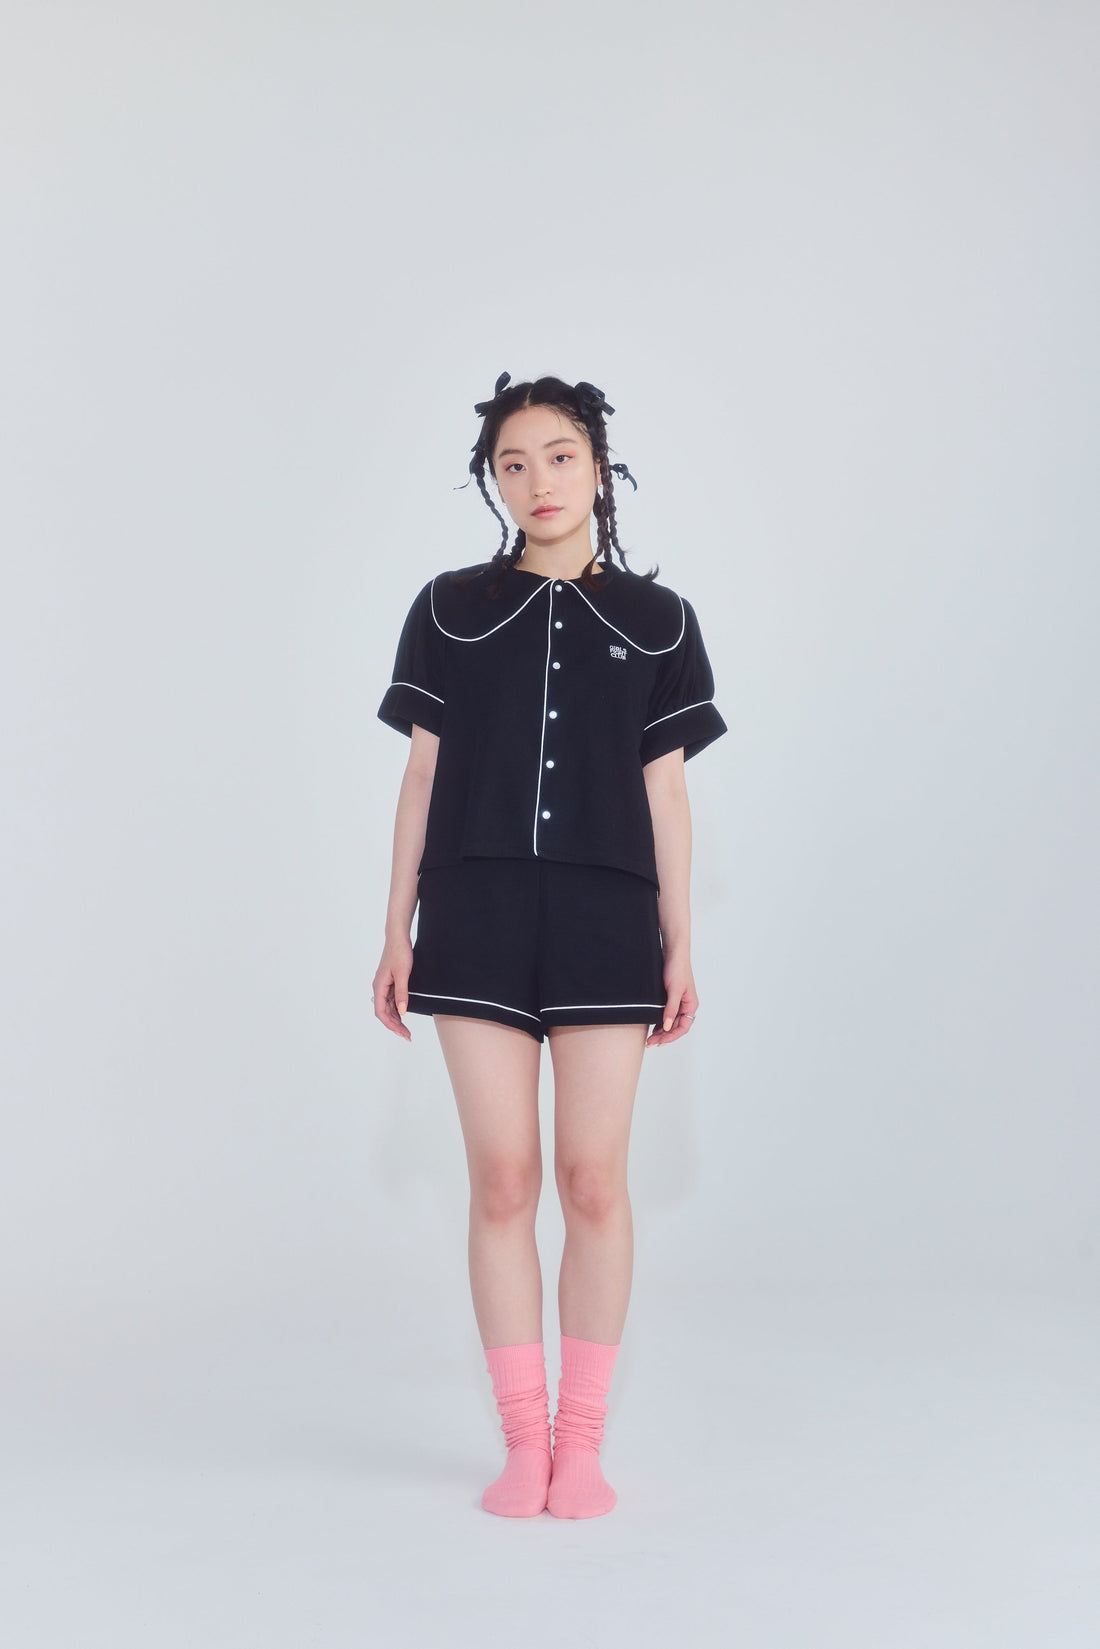 Mary Black Pajamas (short sleeve) <br><br>(This item is currently being prepared for international shipping. <br> Please wait a little longer.)